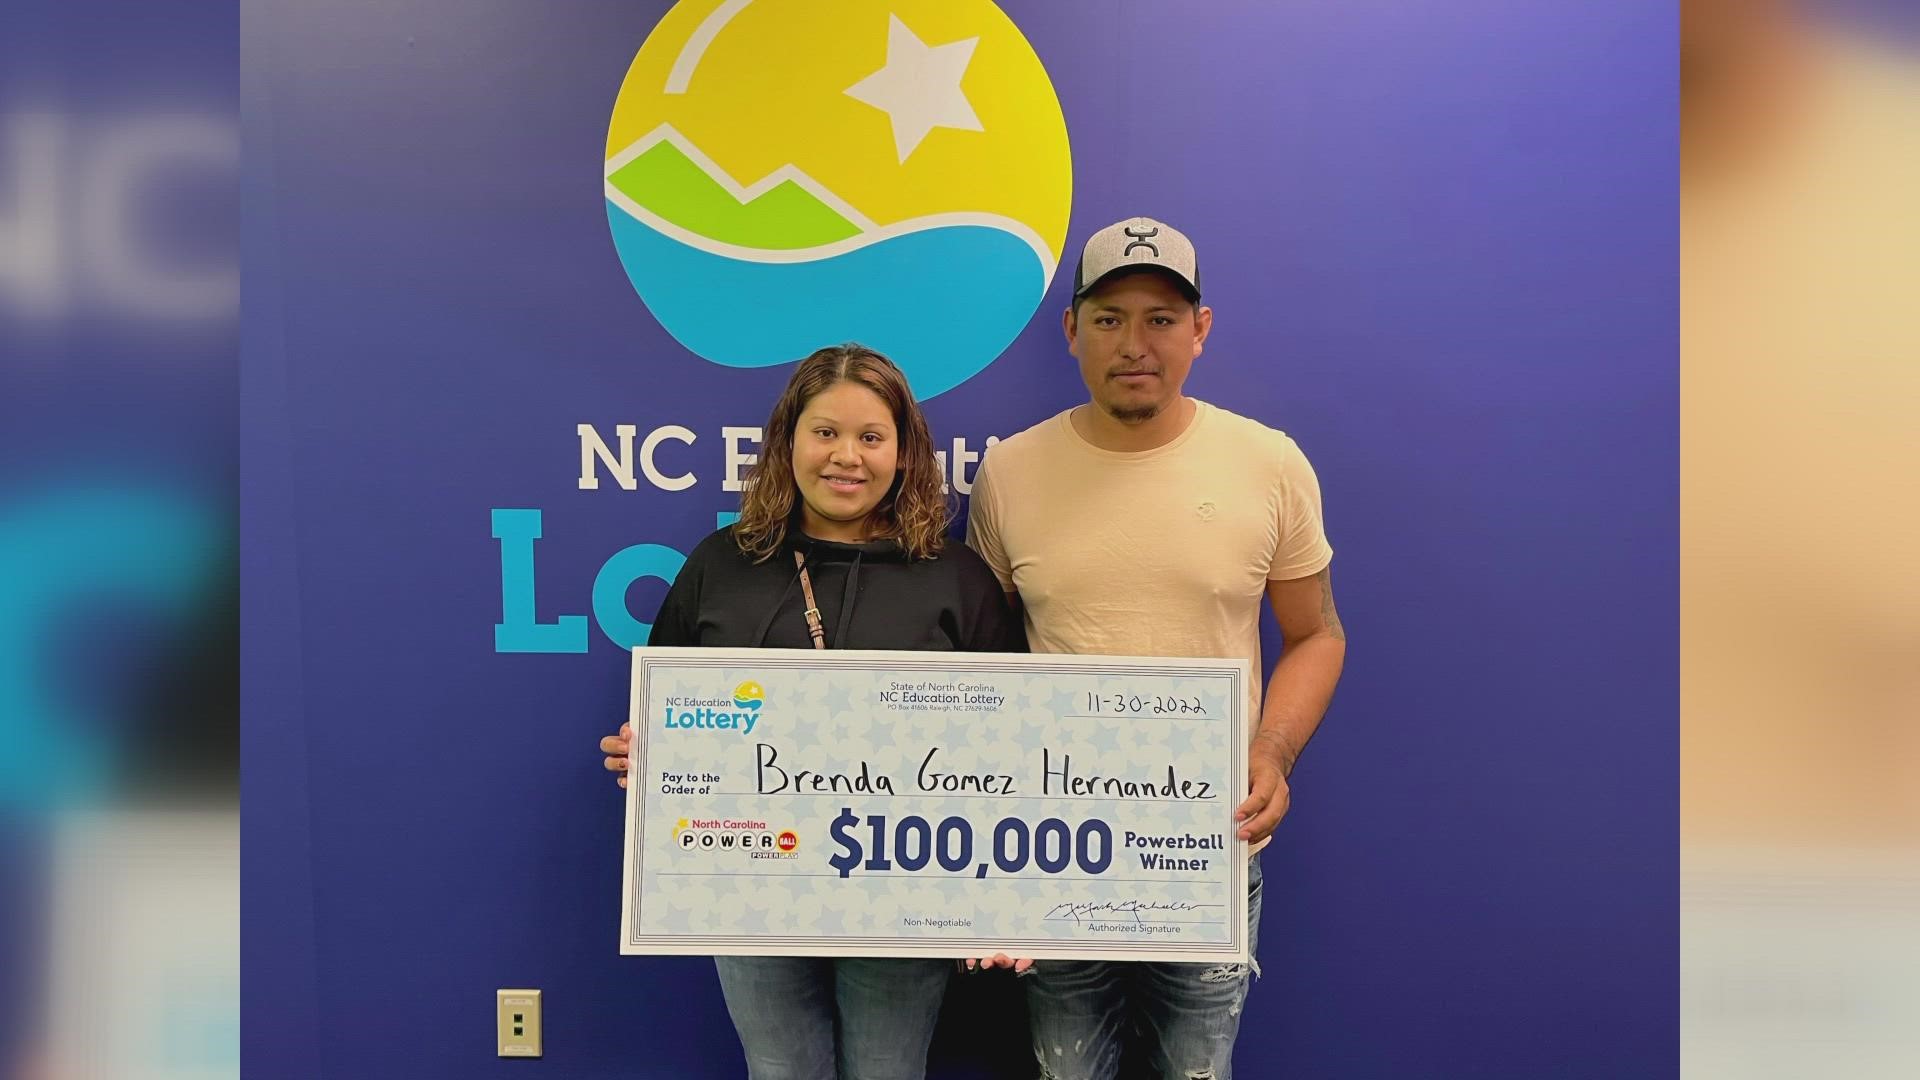 Hours after giving birth to a baby girl, Brenda Hernandez Gomez won a $100,000 Powerball prize thanks to help from her two sons.